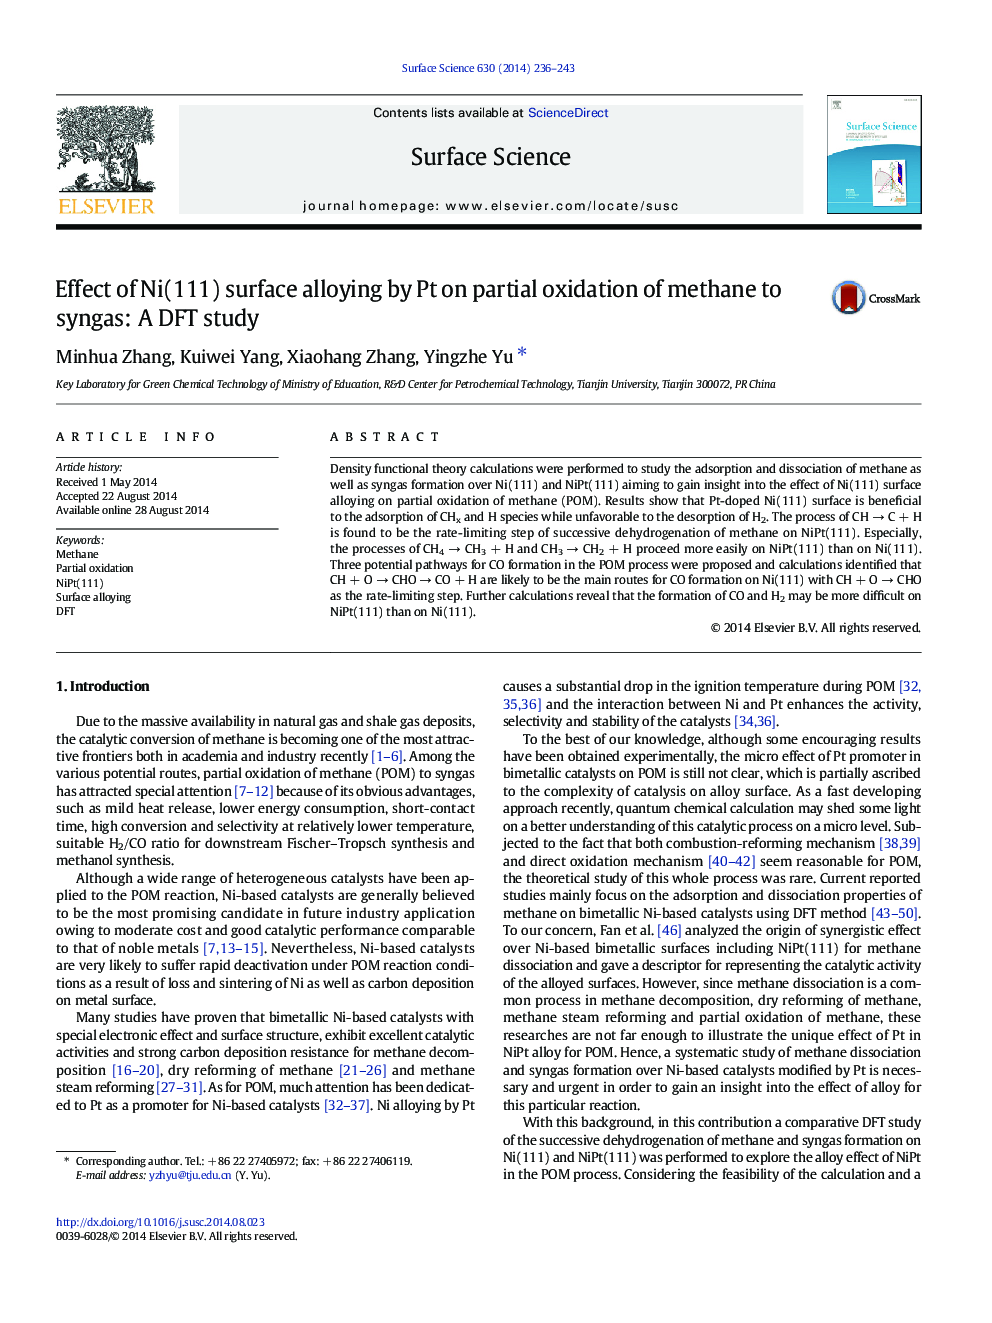 Effect of Ni(111) surface alloying by Pt on partial oxidation of methane to syngas: A DFT study